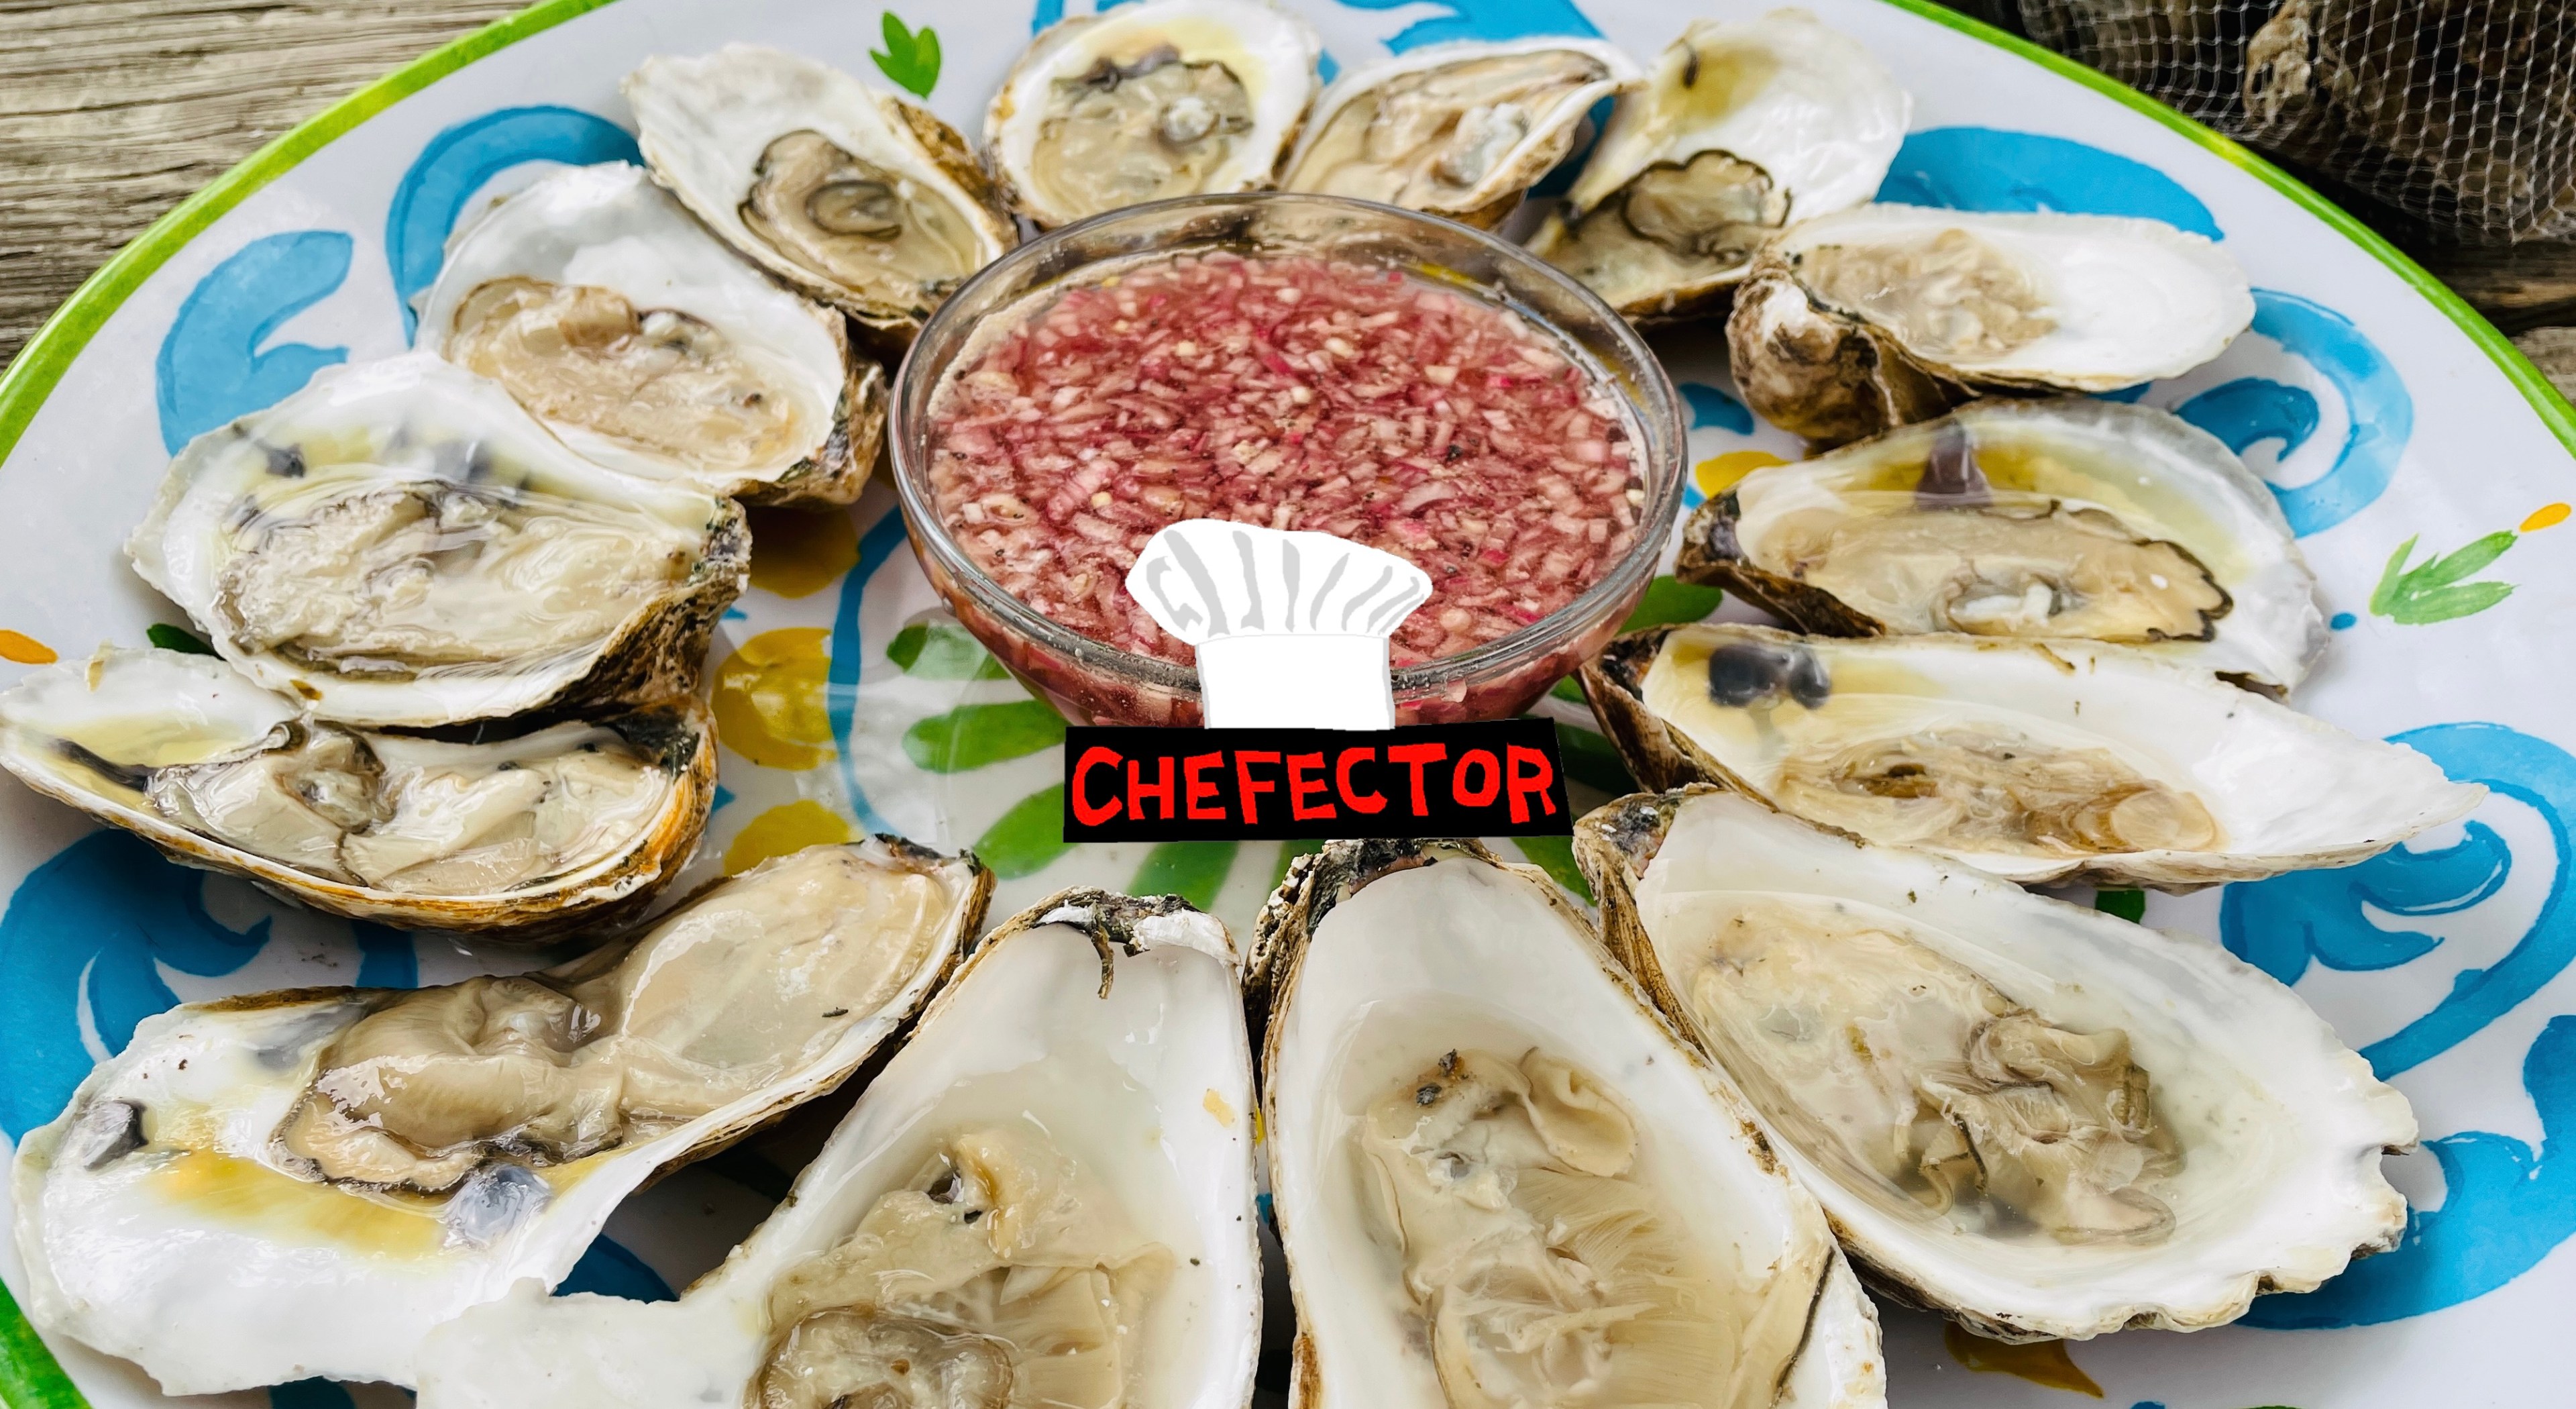 A plate of oysters, a bowl of mignonette sauce, and the Chefector badge